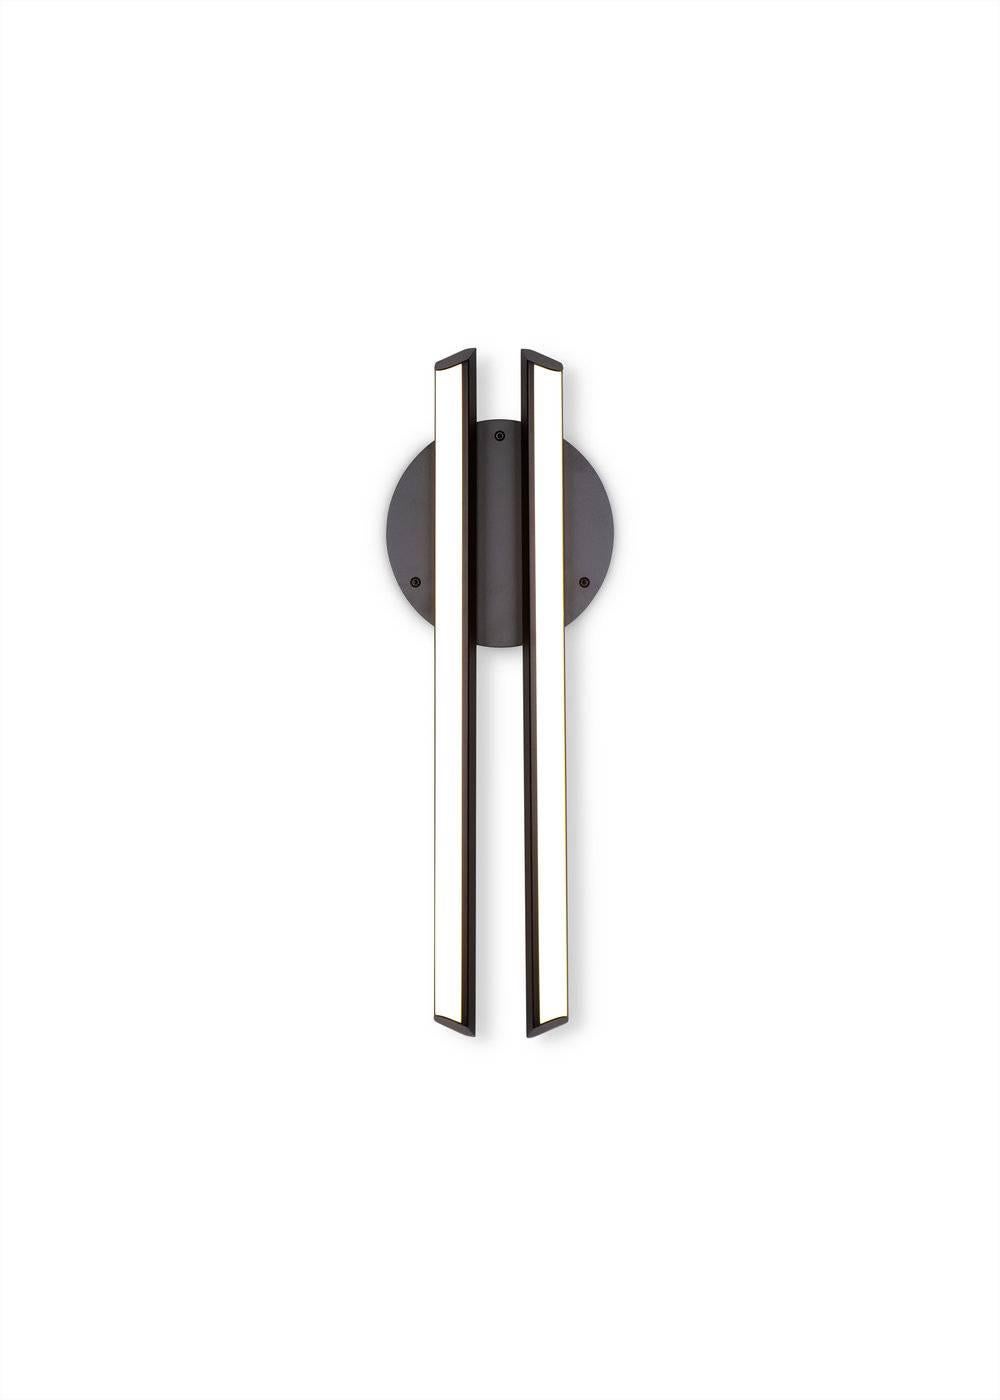 CHIME 23 sconce is inspired by the harmonious sound of resonating bells. CHIME features two parallel bars of soft warm light floating over a disc backplate. Available in two sizes, perfect for a hallway or vanity.

Metal Finish 
Powder-coat finishes